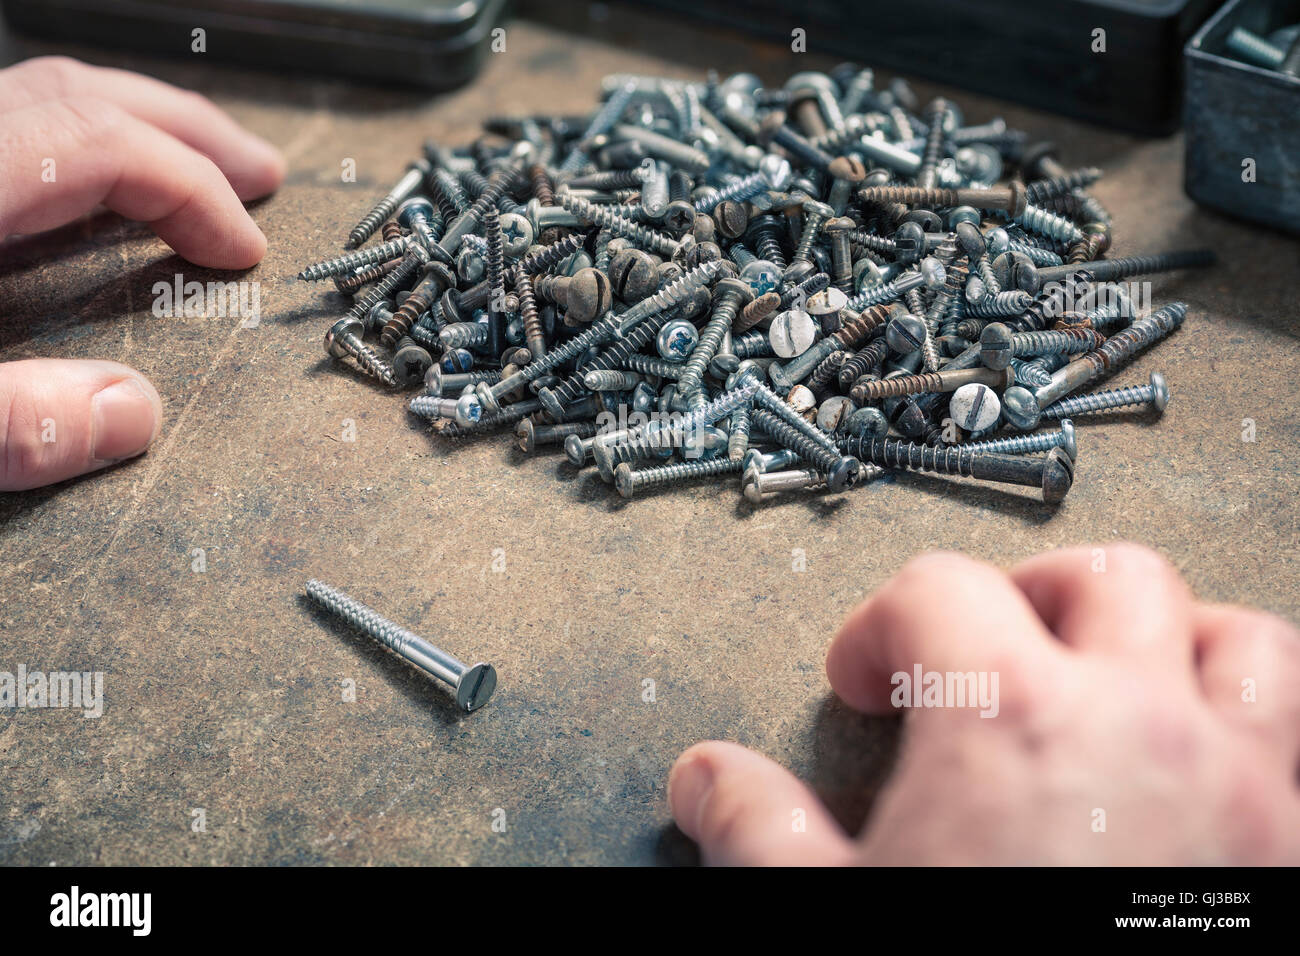 Pair of hands, one screw standing out from pile of different sized screws Stock Photo